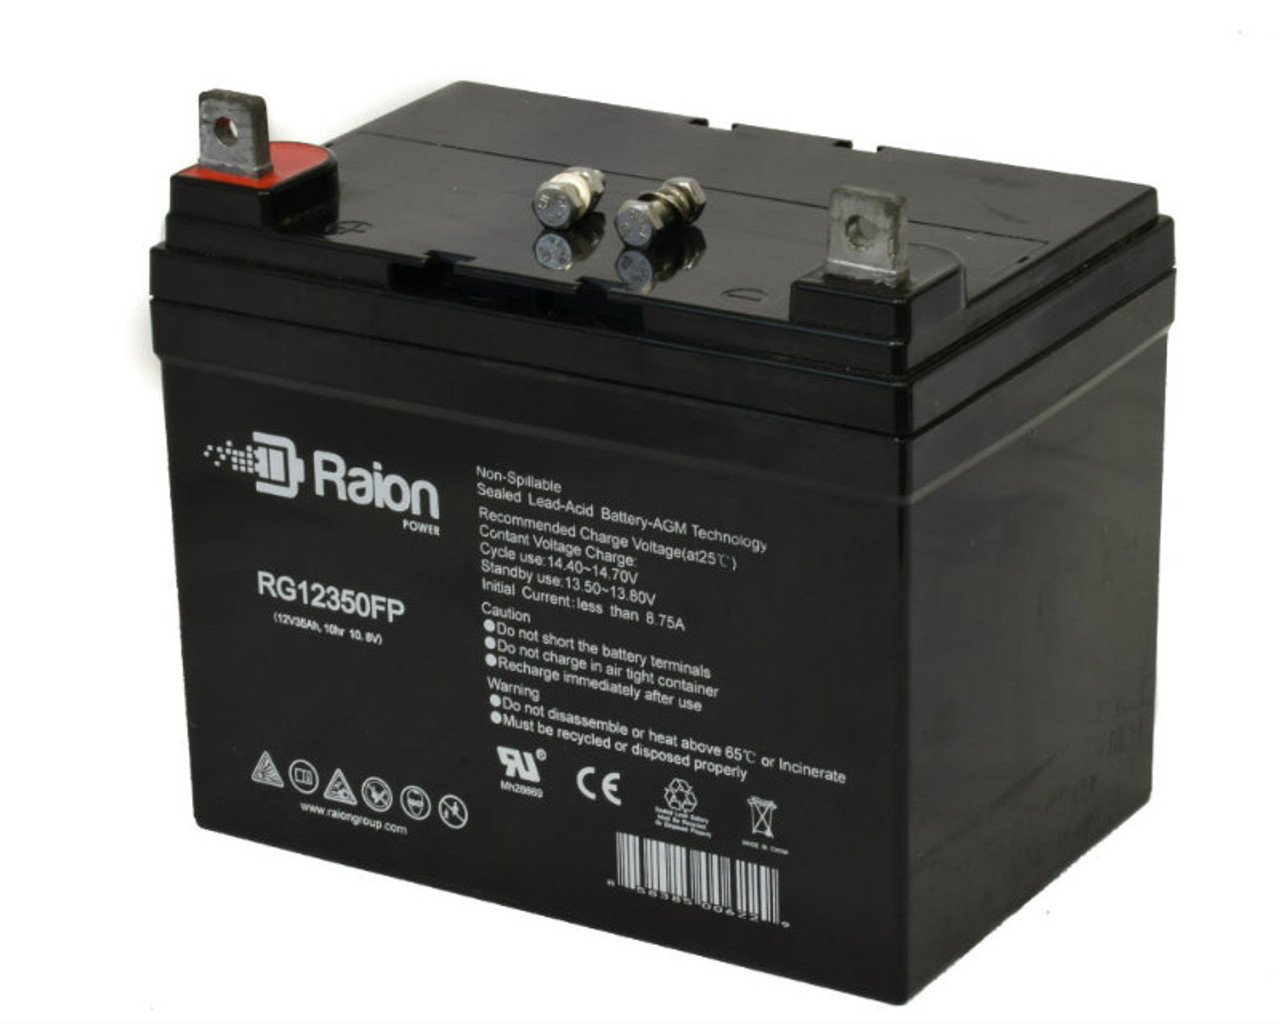 Raion Power Replacement 12V 35Ah RG12350FP Battery for Yazoo Kees ZKW 52252